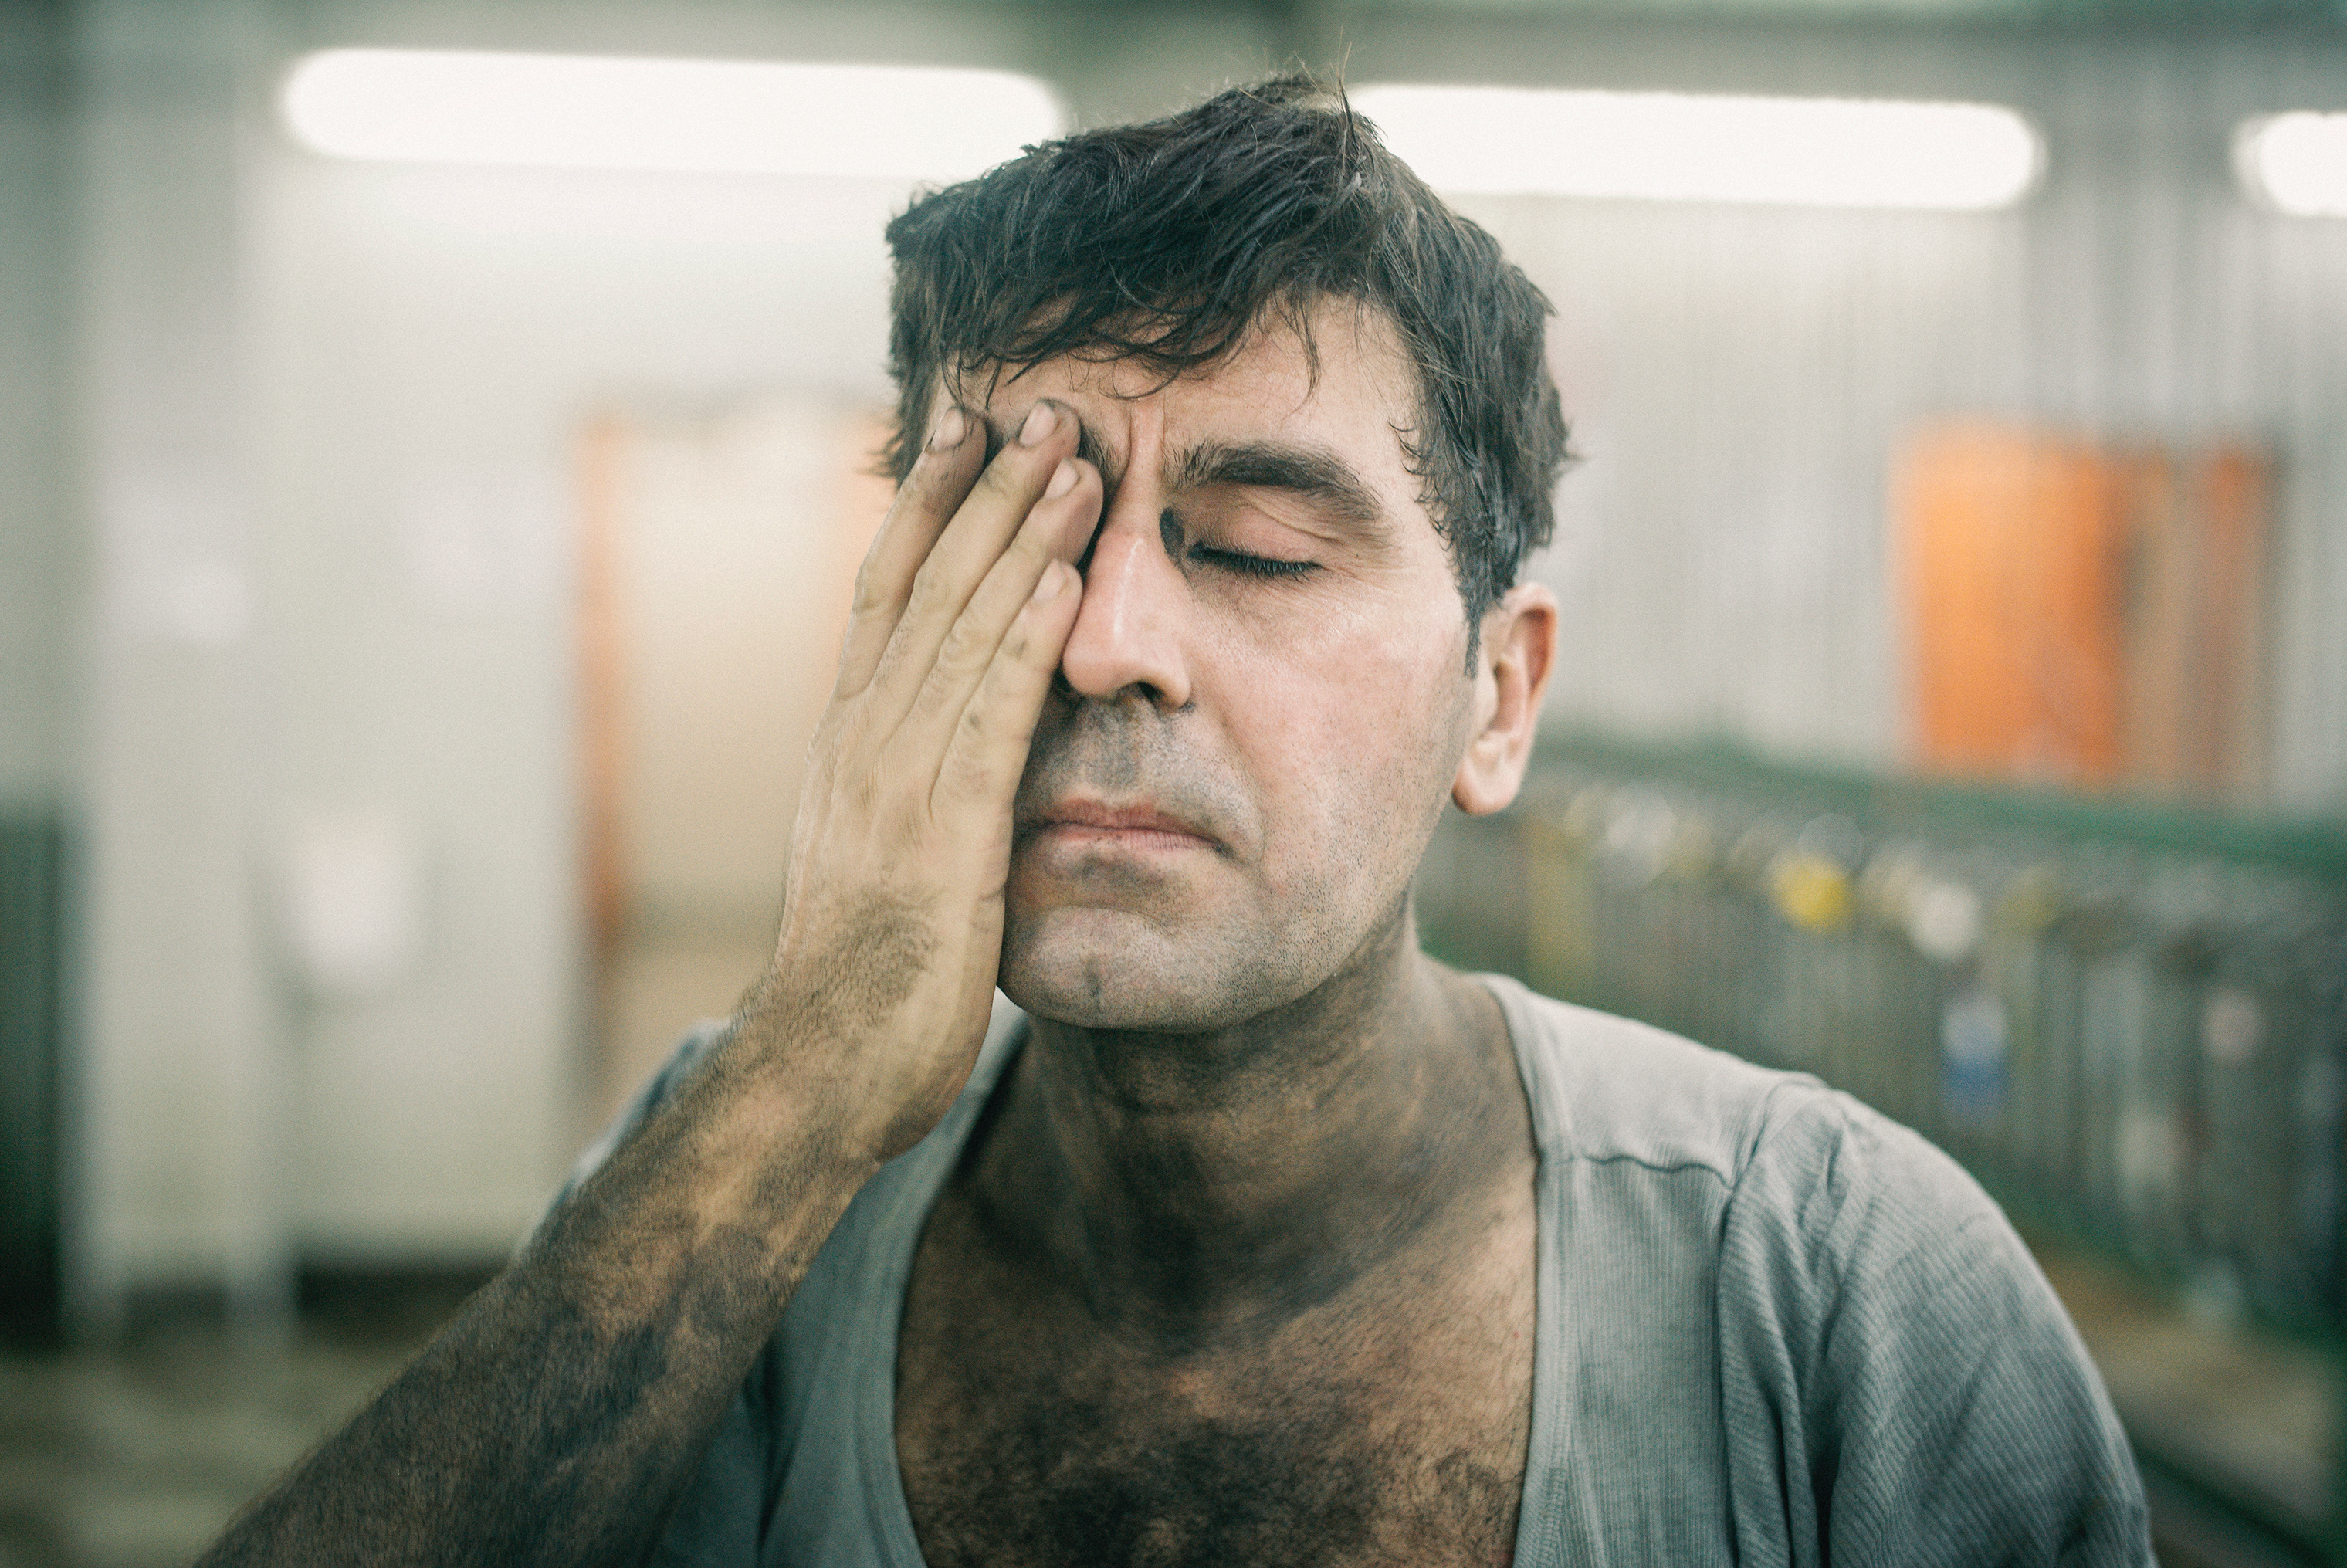 Cin, a Turkish miner, washes coal dust from his face after a night shift in December 2017. (Nanna Heitmann)